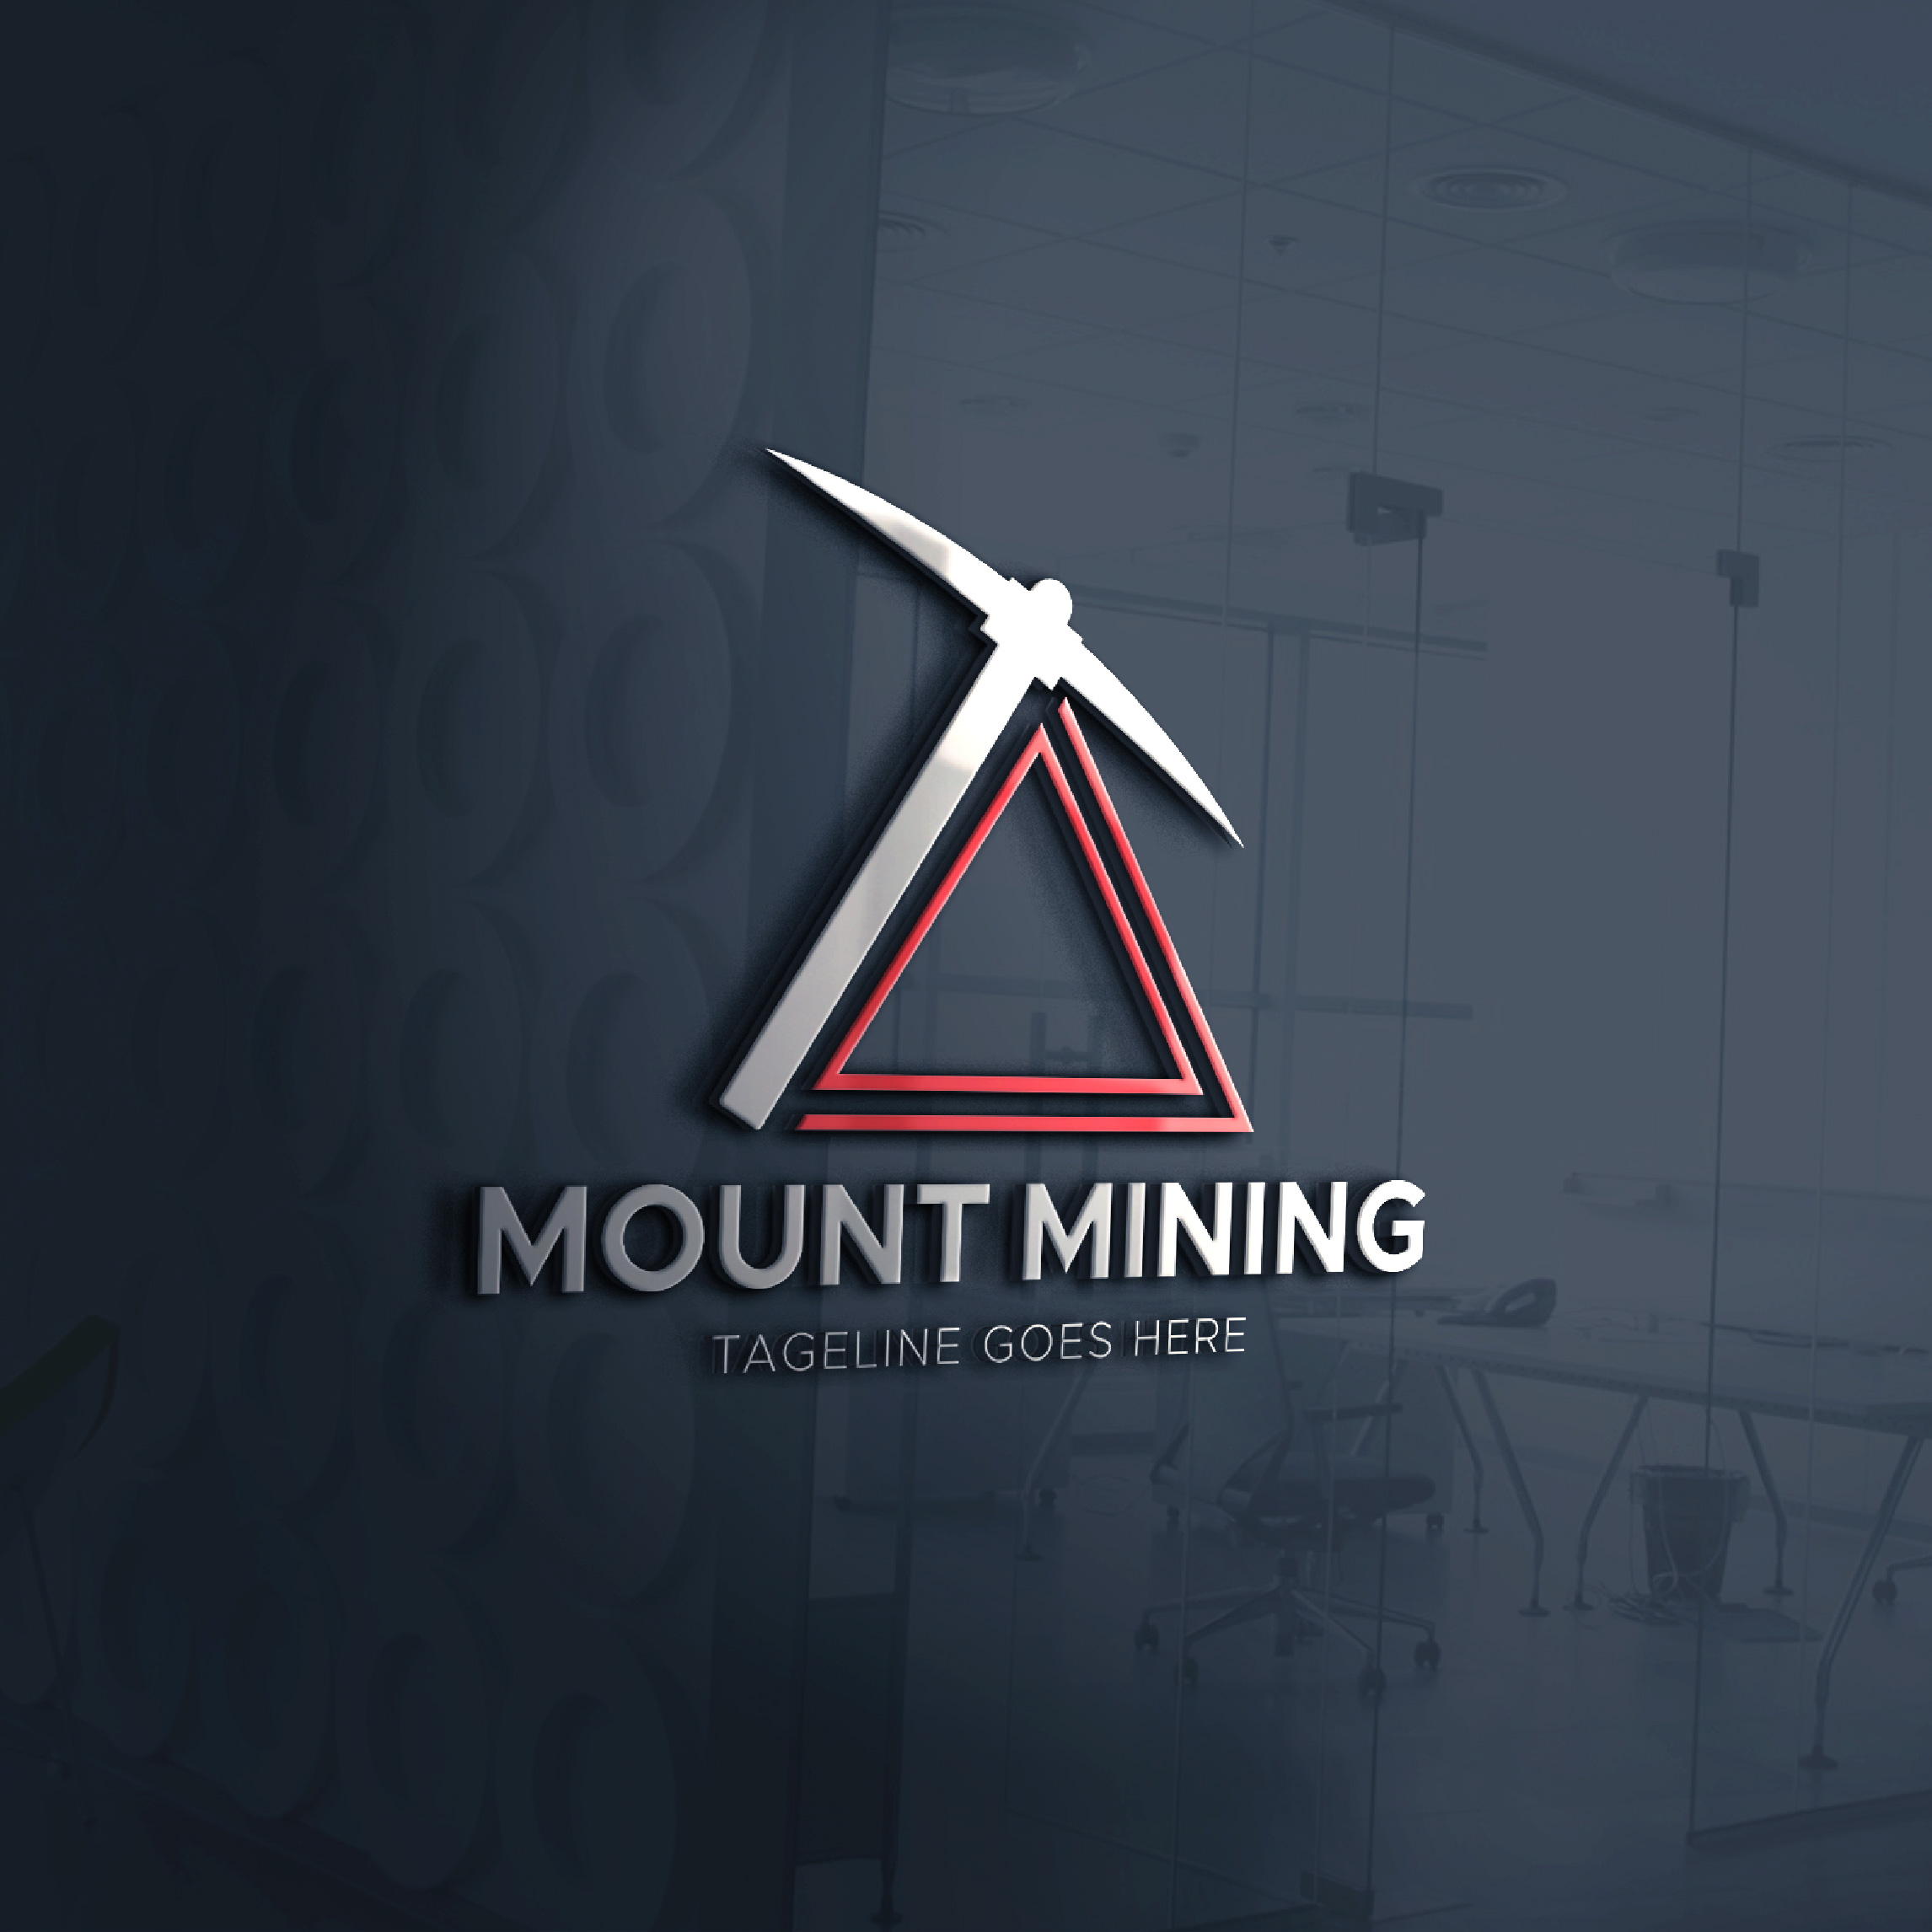 Mount Mining Construction Company Logo Template cover image.